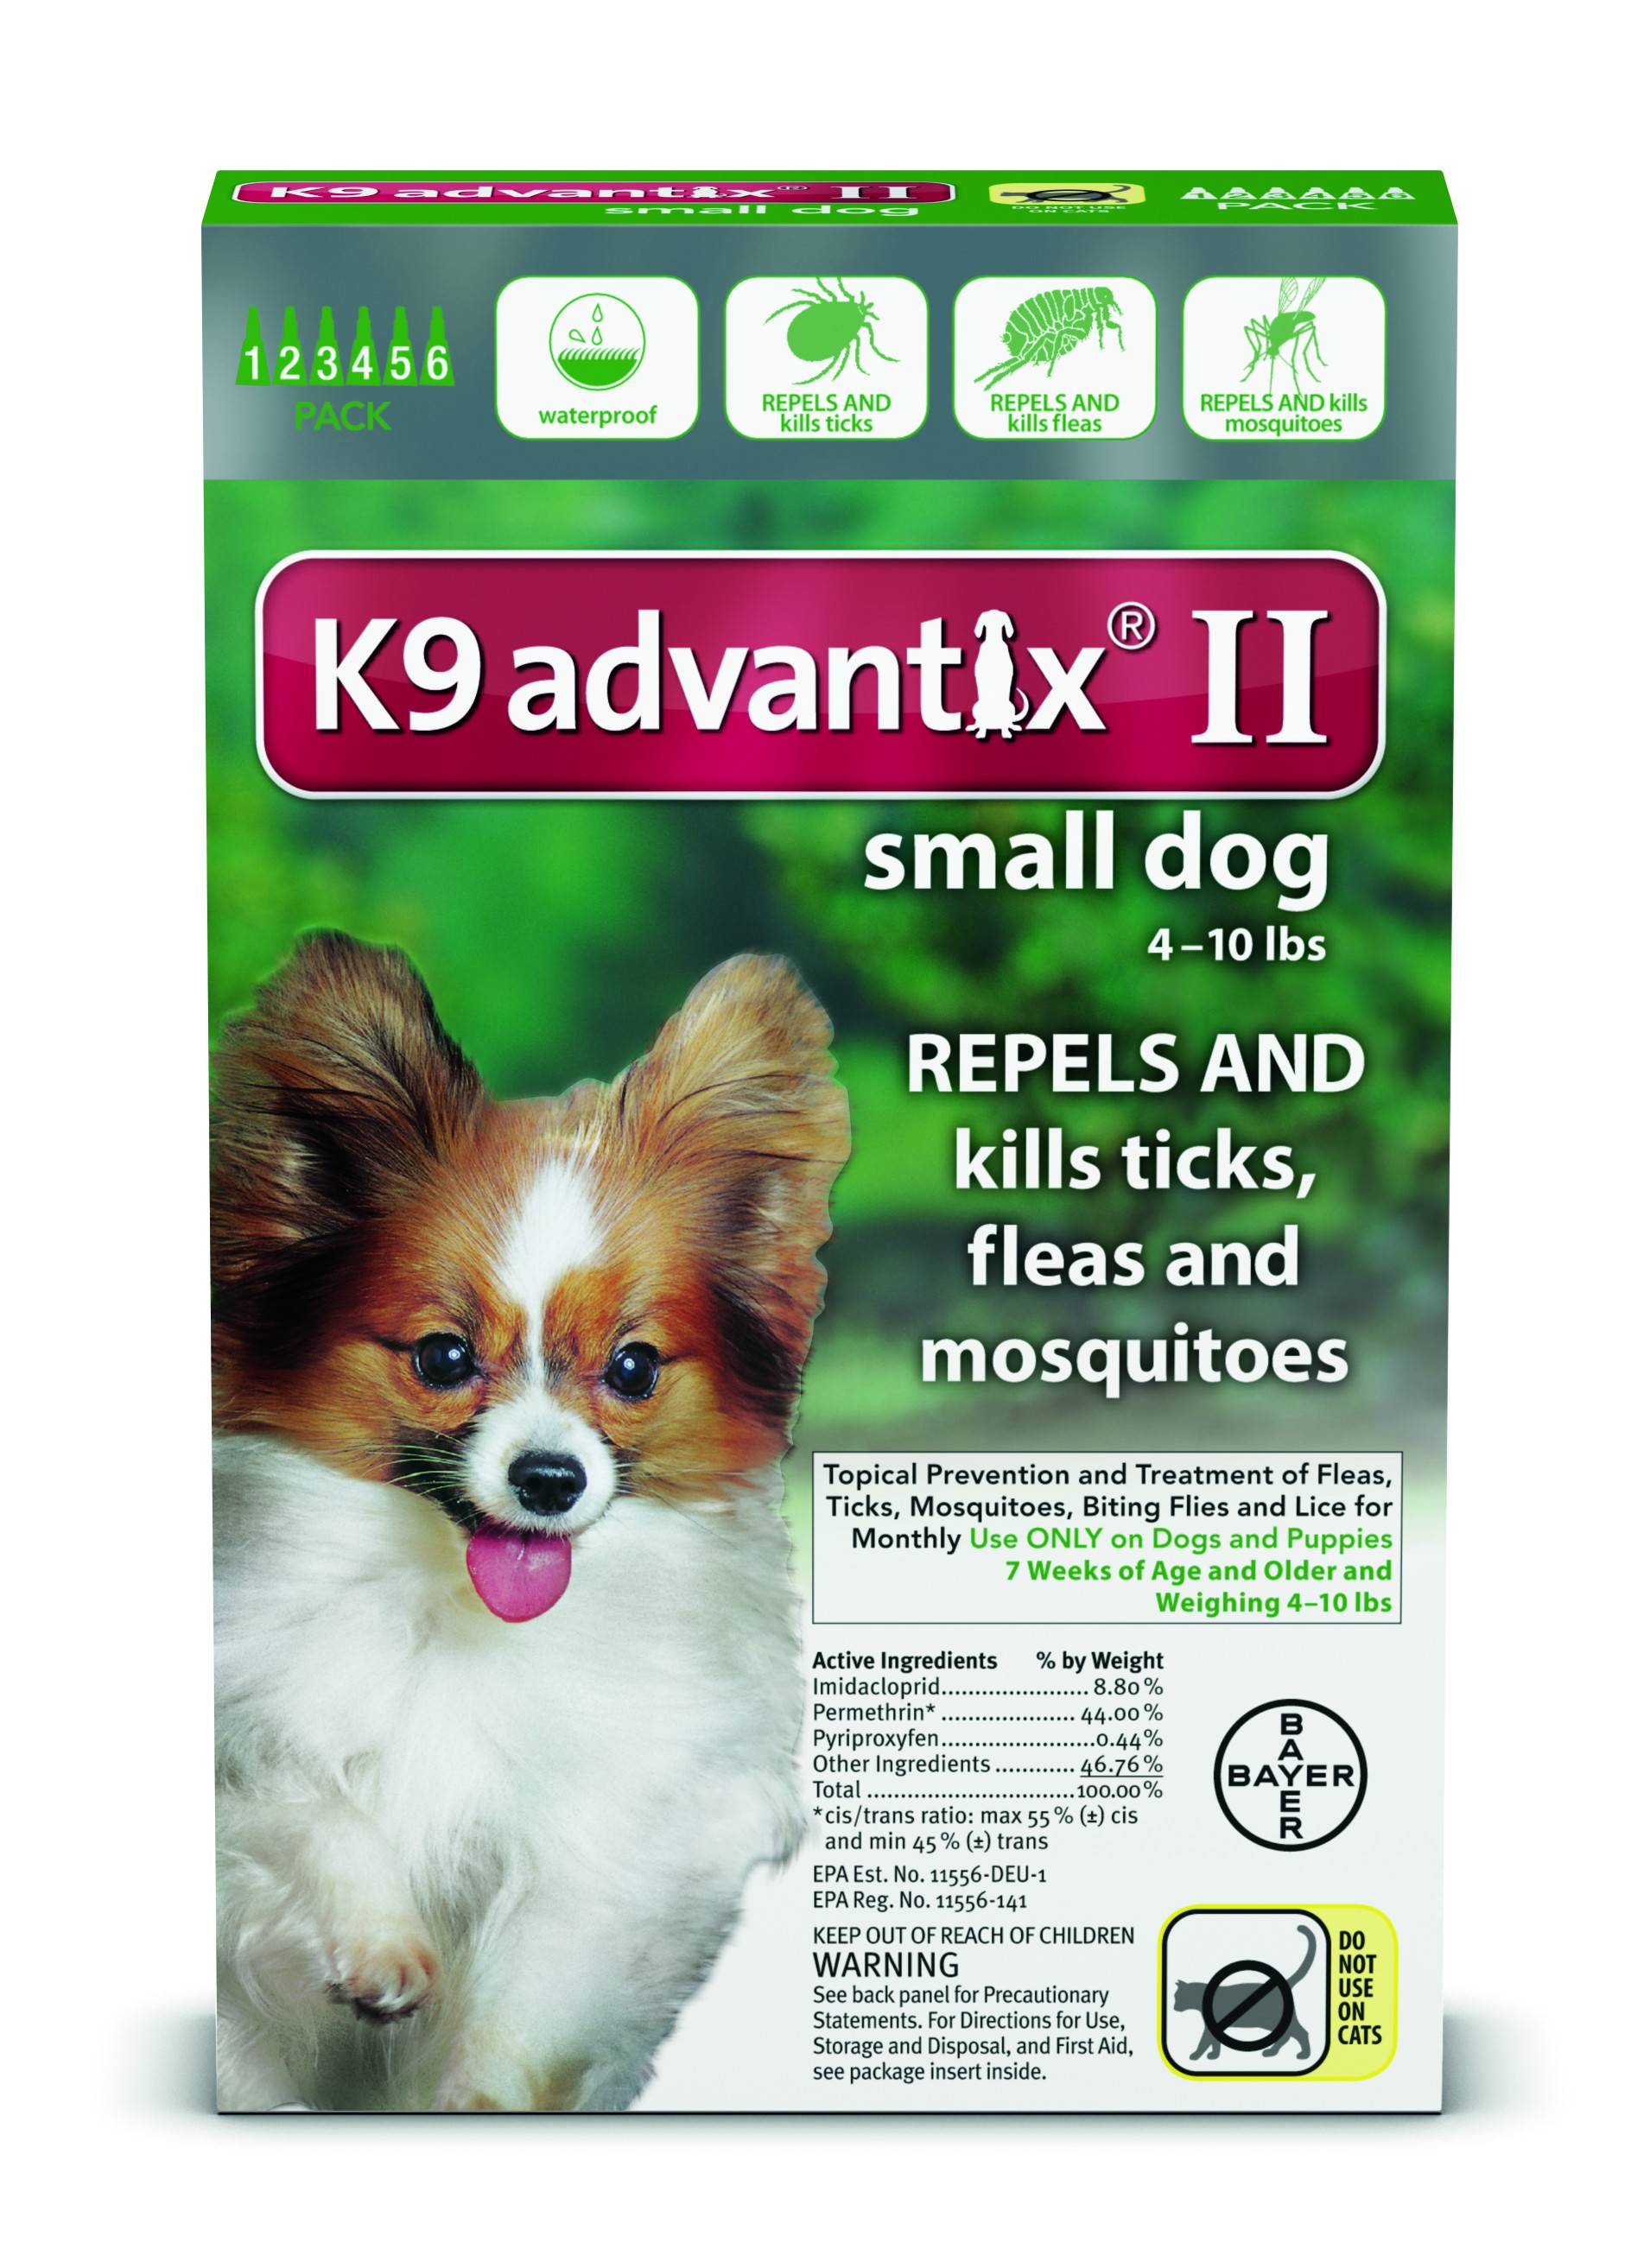 k9-advantix-ii-for-small-dogs-under-10-lbs-6-month-supply